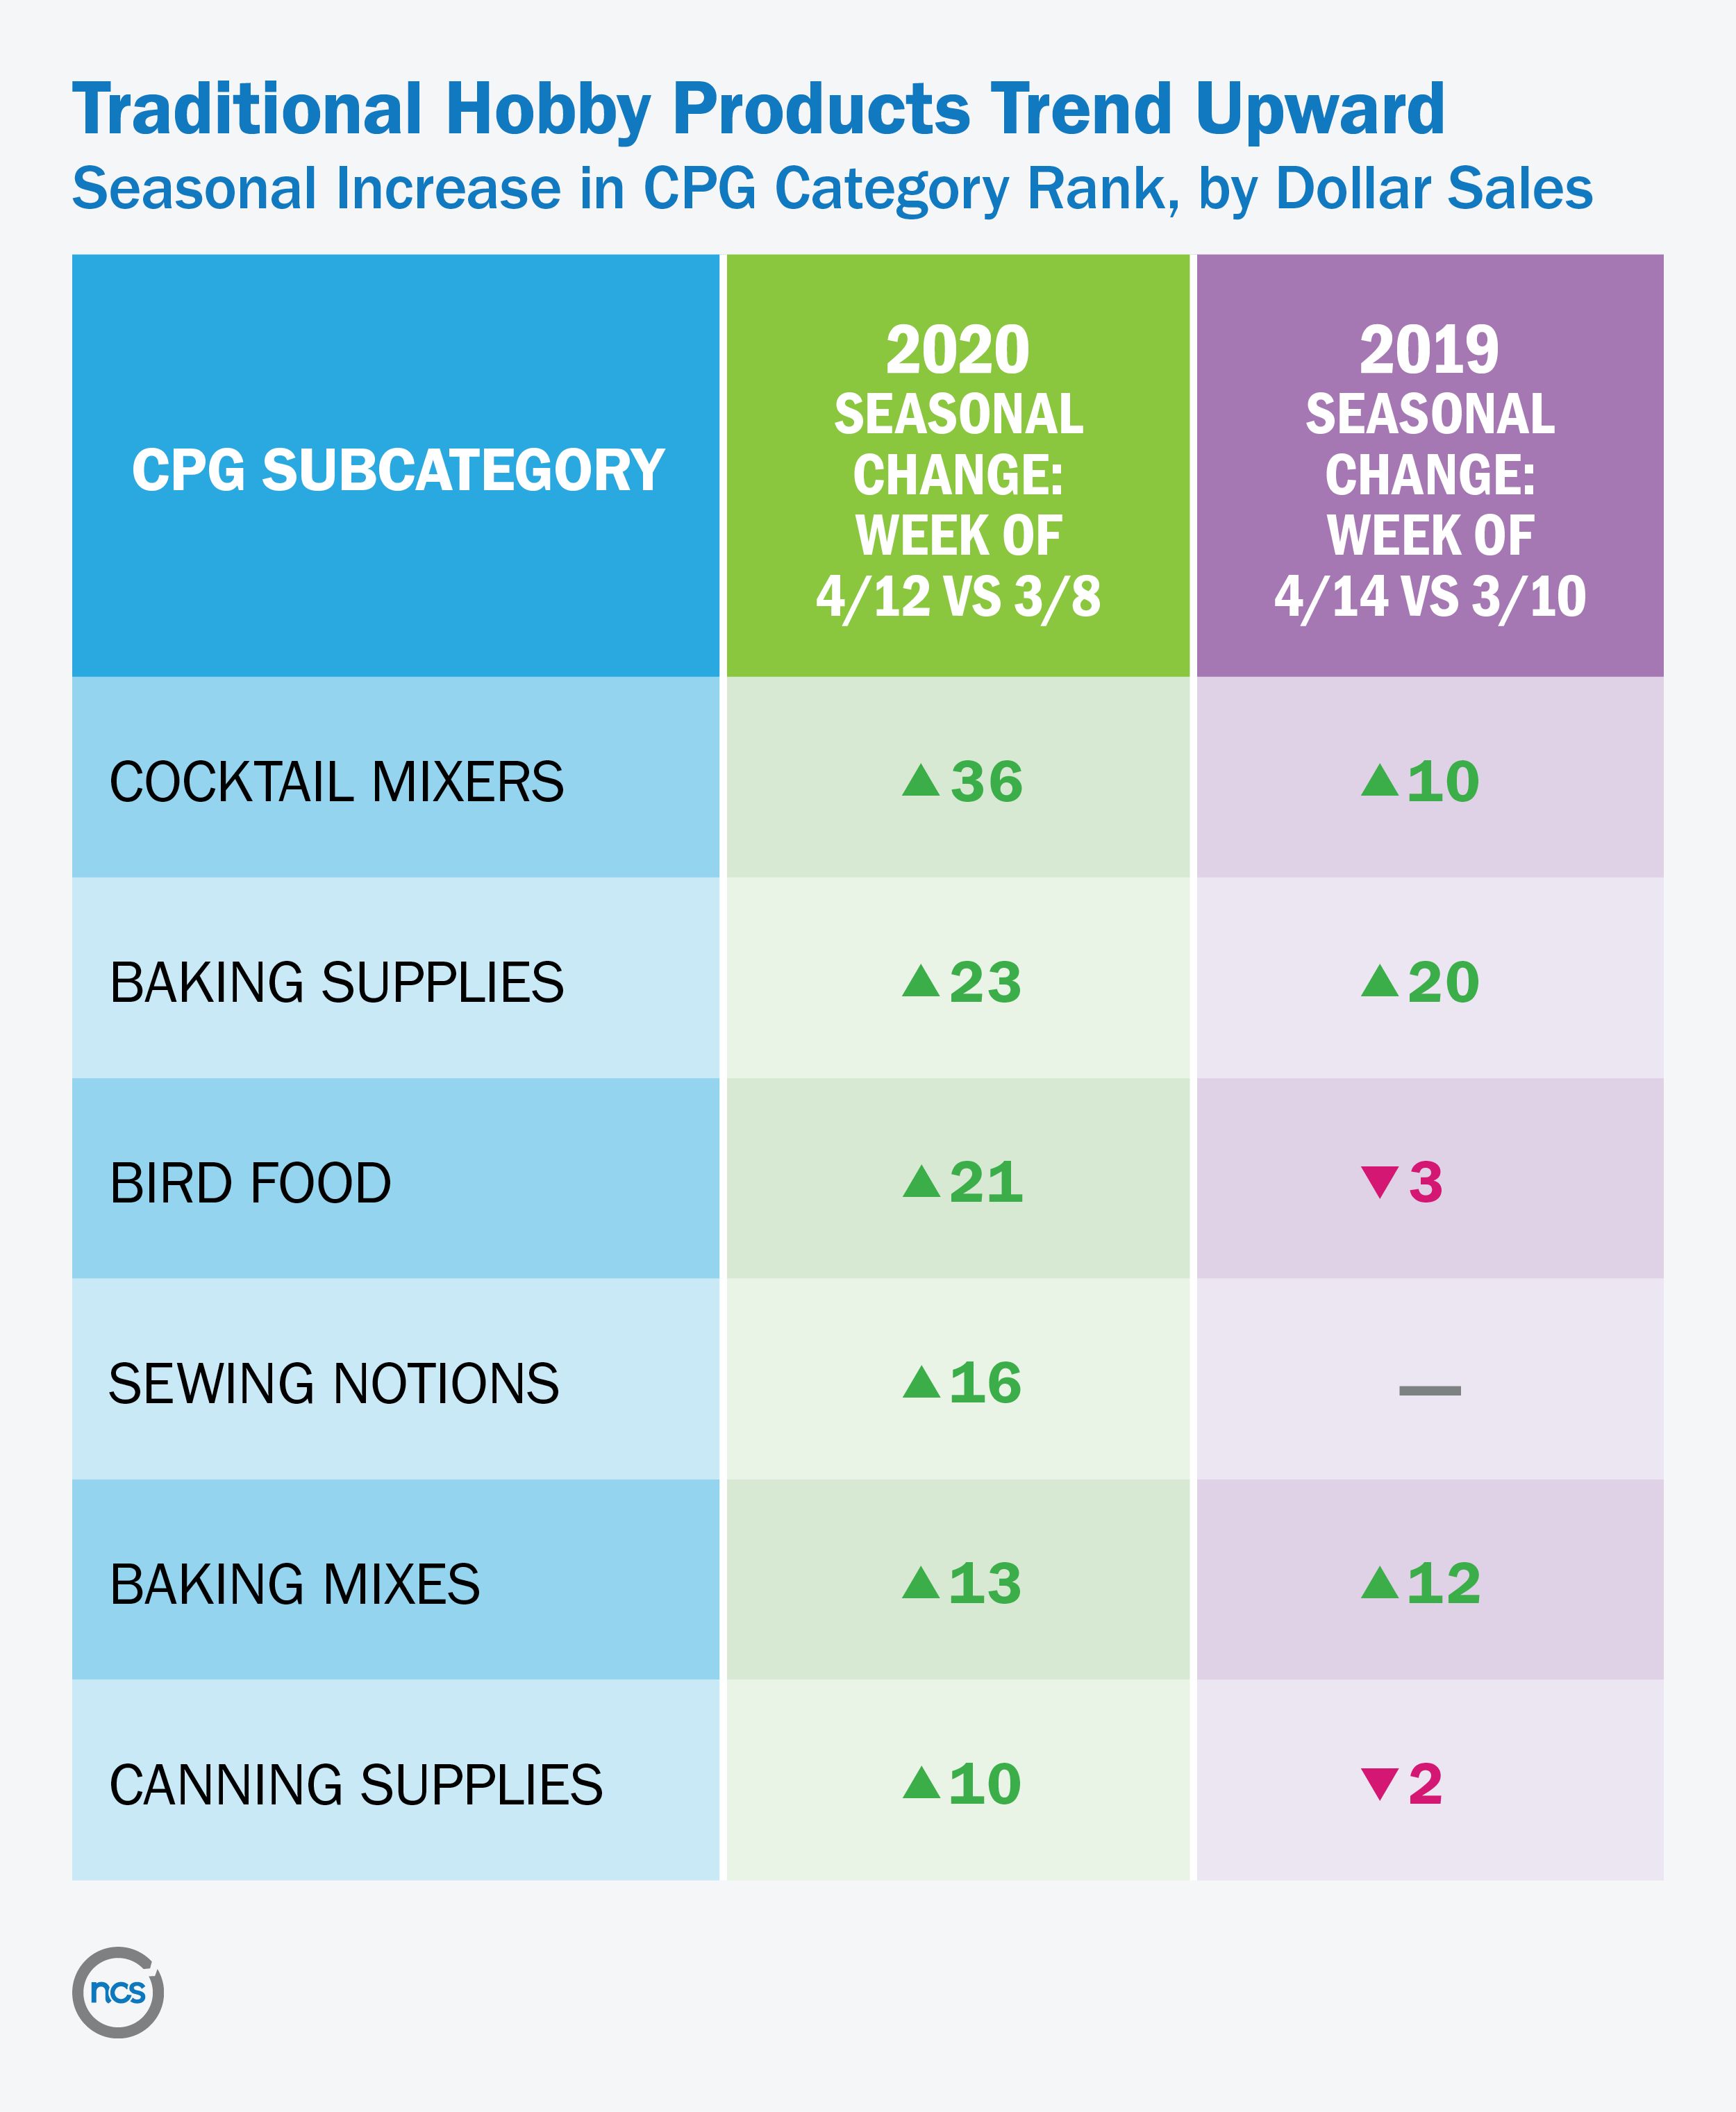 Traditional hobby products like cocktail mixers, baking supplies and sewing notions trend up in CPG category rank (by dollar sales) the week of 4/12/20. 